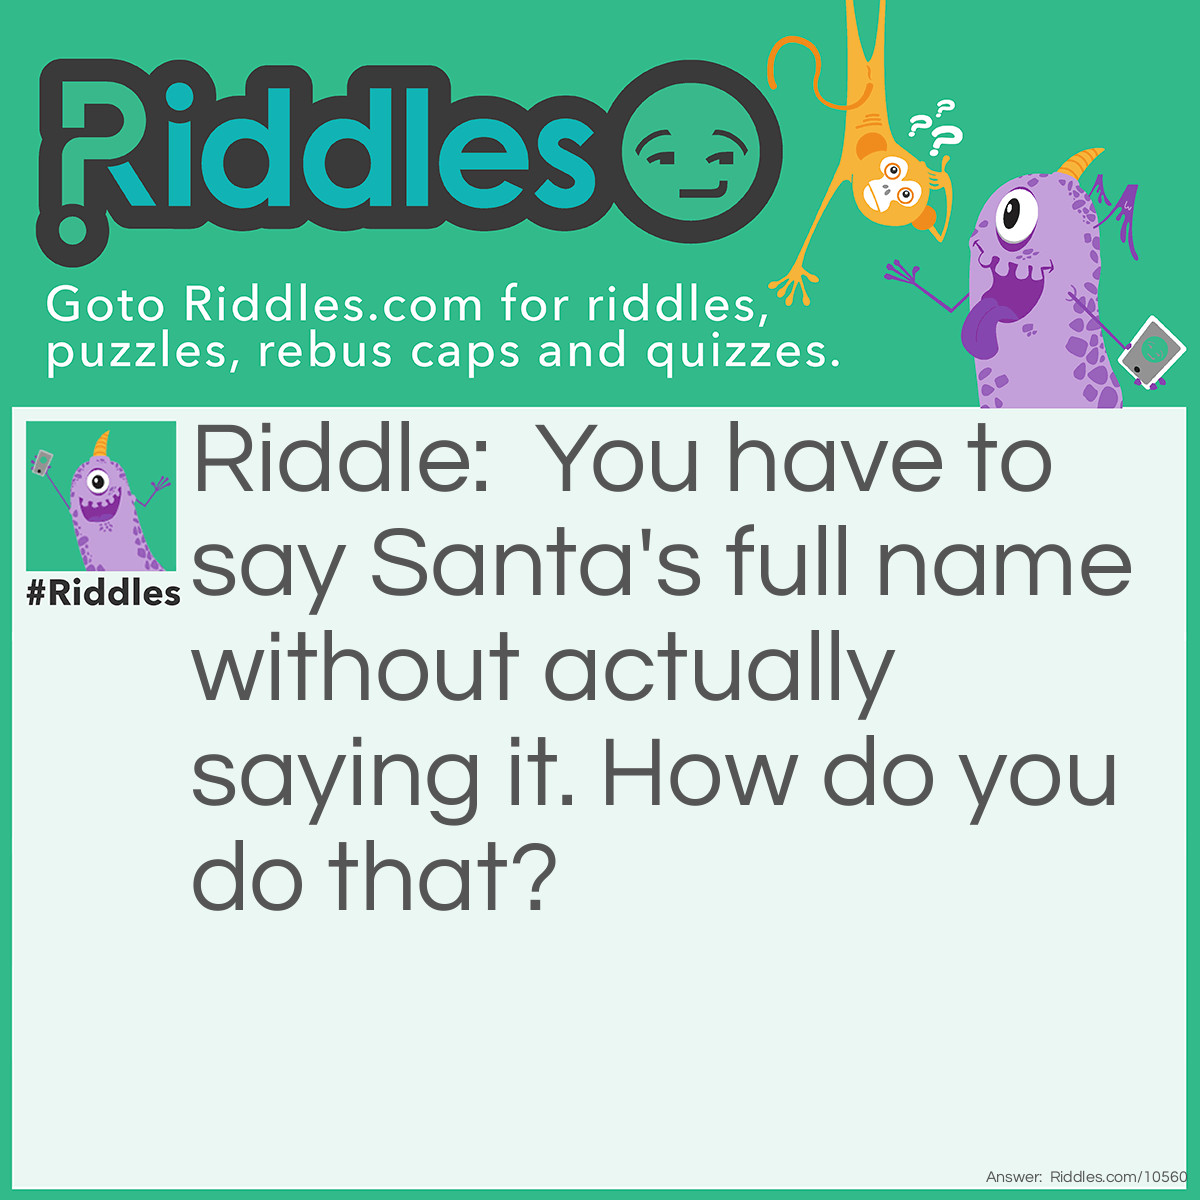 Riddle: You have to say Santa's full name without actually saying it. How do you do that? Answer: Say 'Sand or clause' !